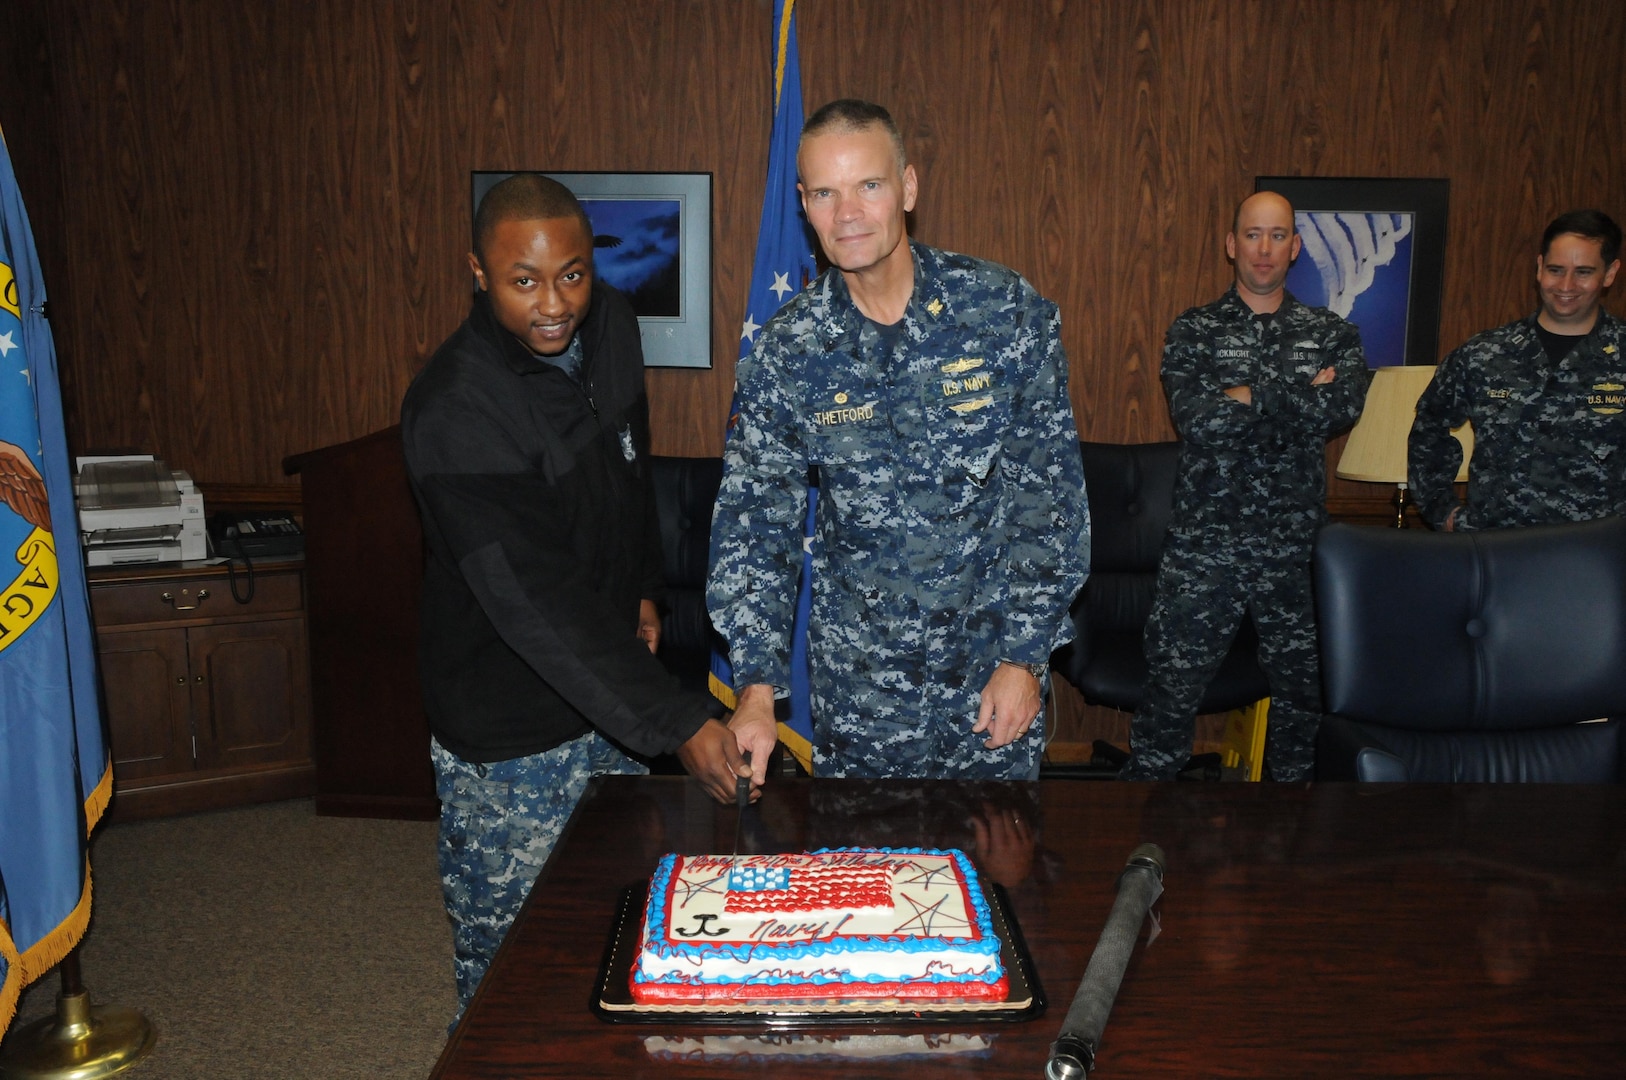 Shipmates at DLA Distribution Norfolk, Va., including LS1 Daniel Cordero, Lt. Matthew Kelley, QM1 Andrew McKnight, Capt. Harry Thetford (DLA Distribution Norfolk’s commander), LS2 Dana Plummer, Lt. Cmdr. Chris Mayfield, and Lt. Emmanuel Nneji, cut a cake honoring the 240th birthday of the Navy. In tradition, the cake was cut with the oldest and youngest members of the command.